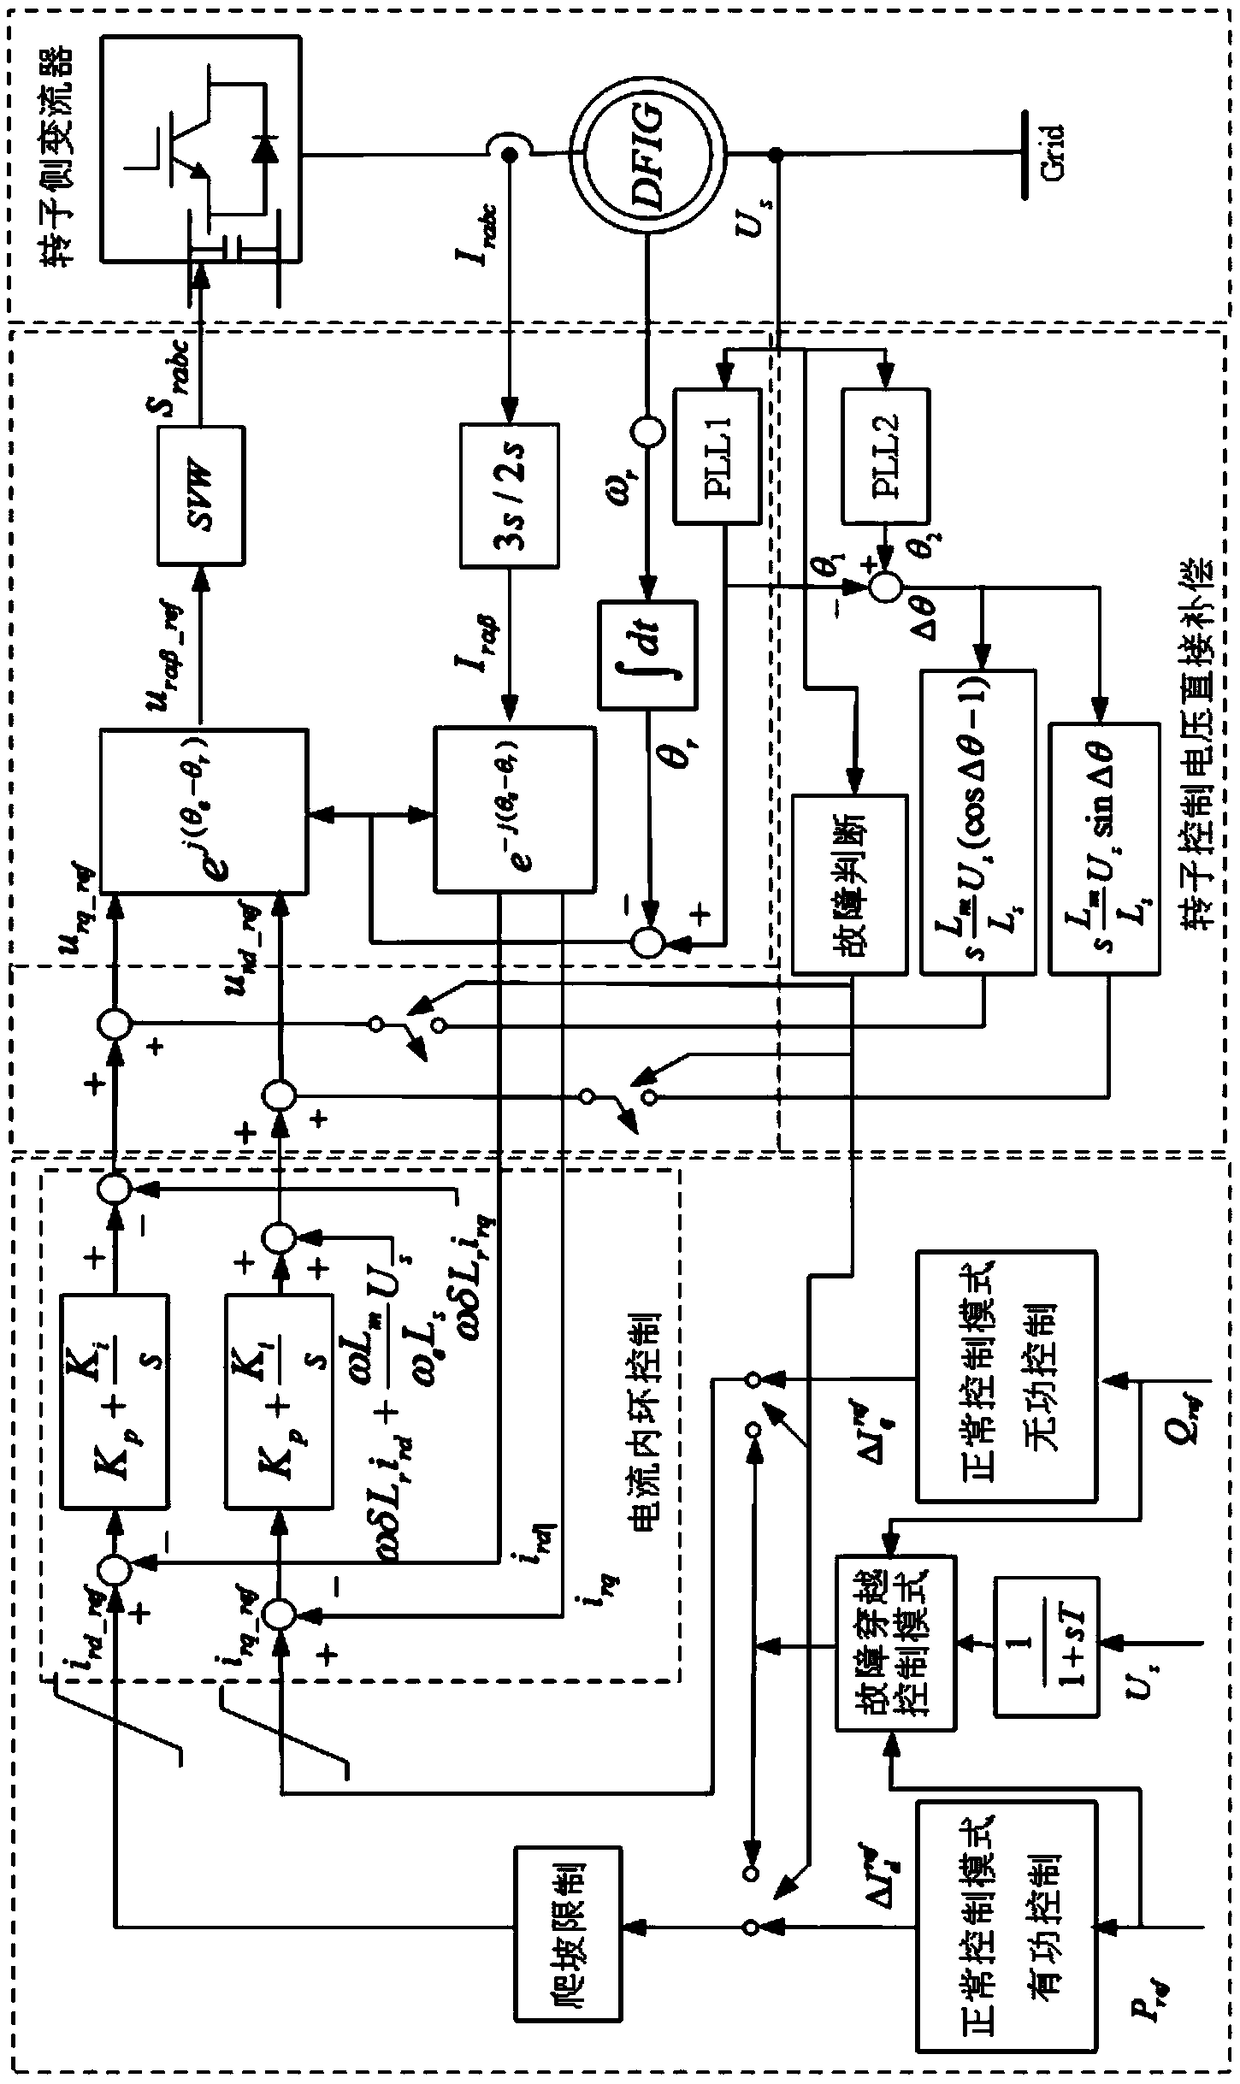 A method and system for fault traverse control of a doubly fed wind turbine generator system